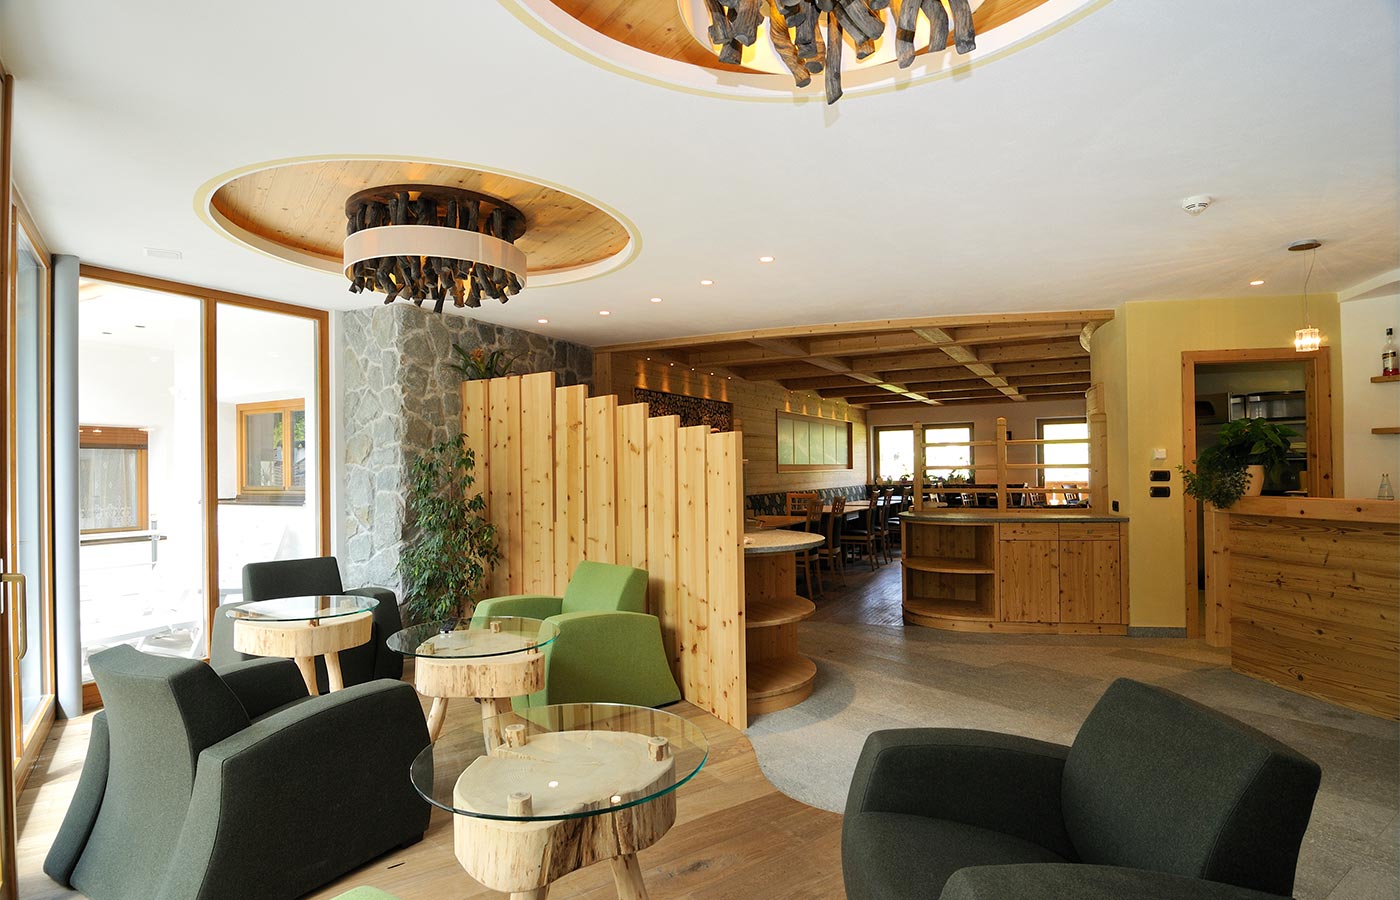 Details of the dining room of the Hotel in Selva Val Gardena